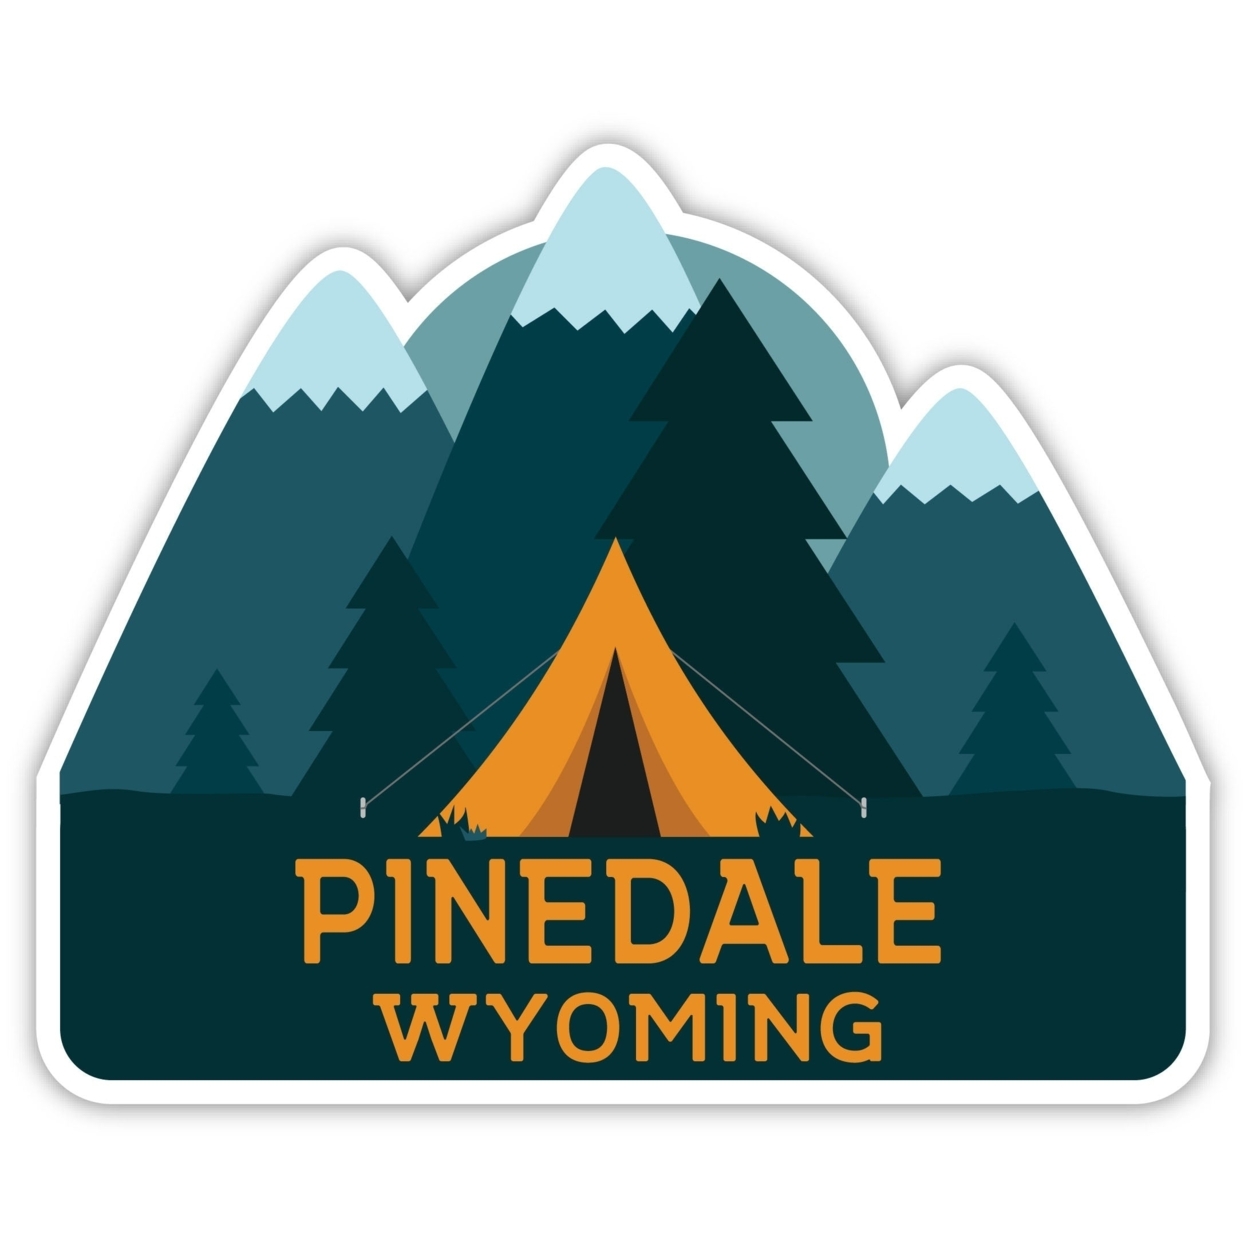 Pinedale Wyoming Souvenir Decorative Stickers (Choose Theme And Size) - Single Unit, 2-Inch, Bear